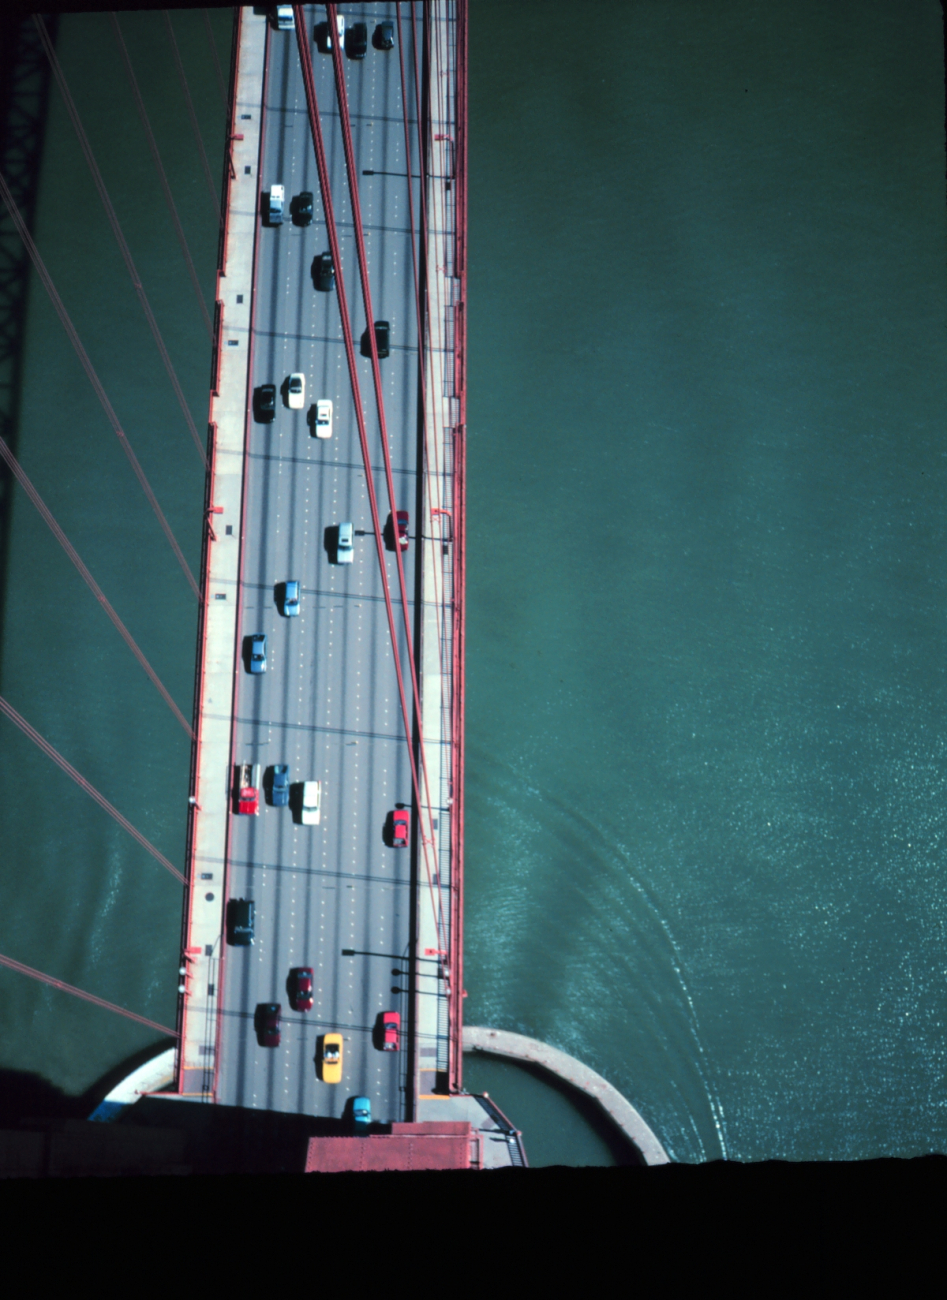 View from the top of the south tower of the Golden Gate Bridge looking down onto the deck of the bridge